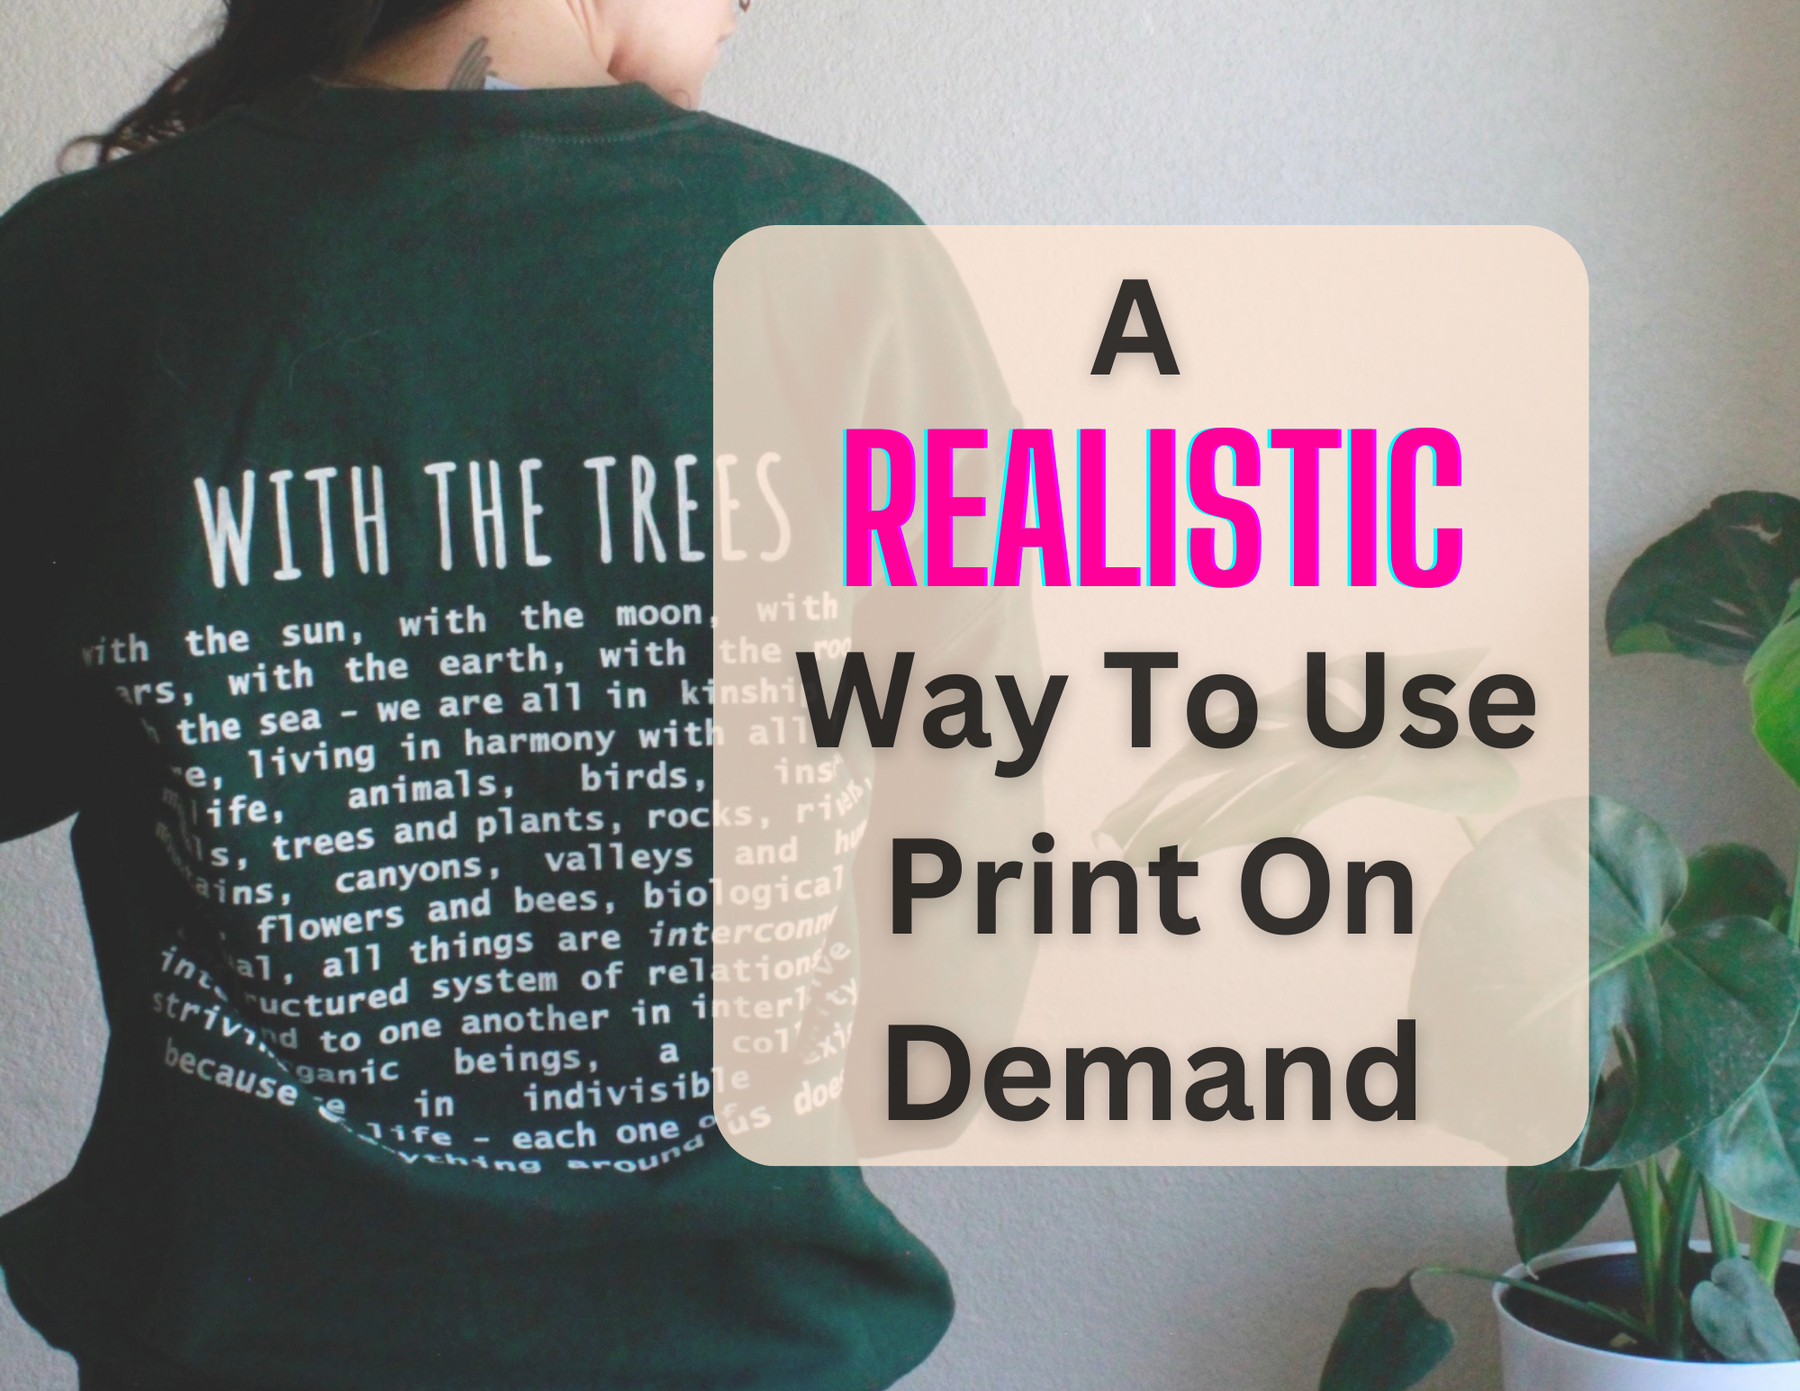 A REALISTIC Way To Use Print On Demand